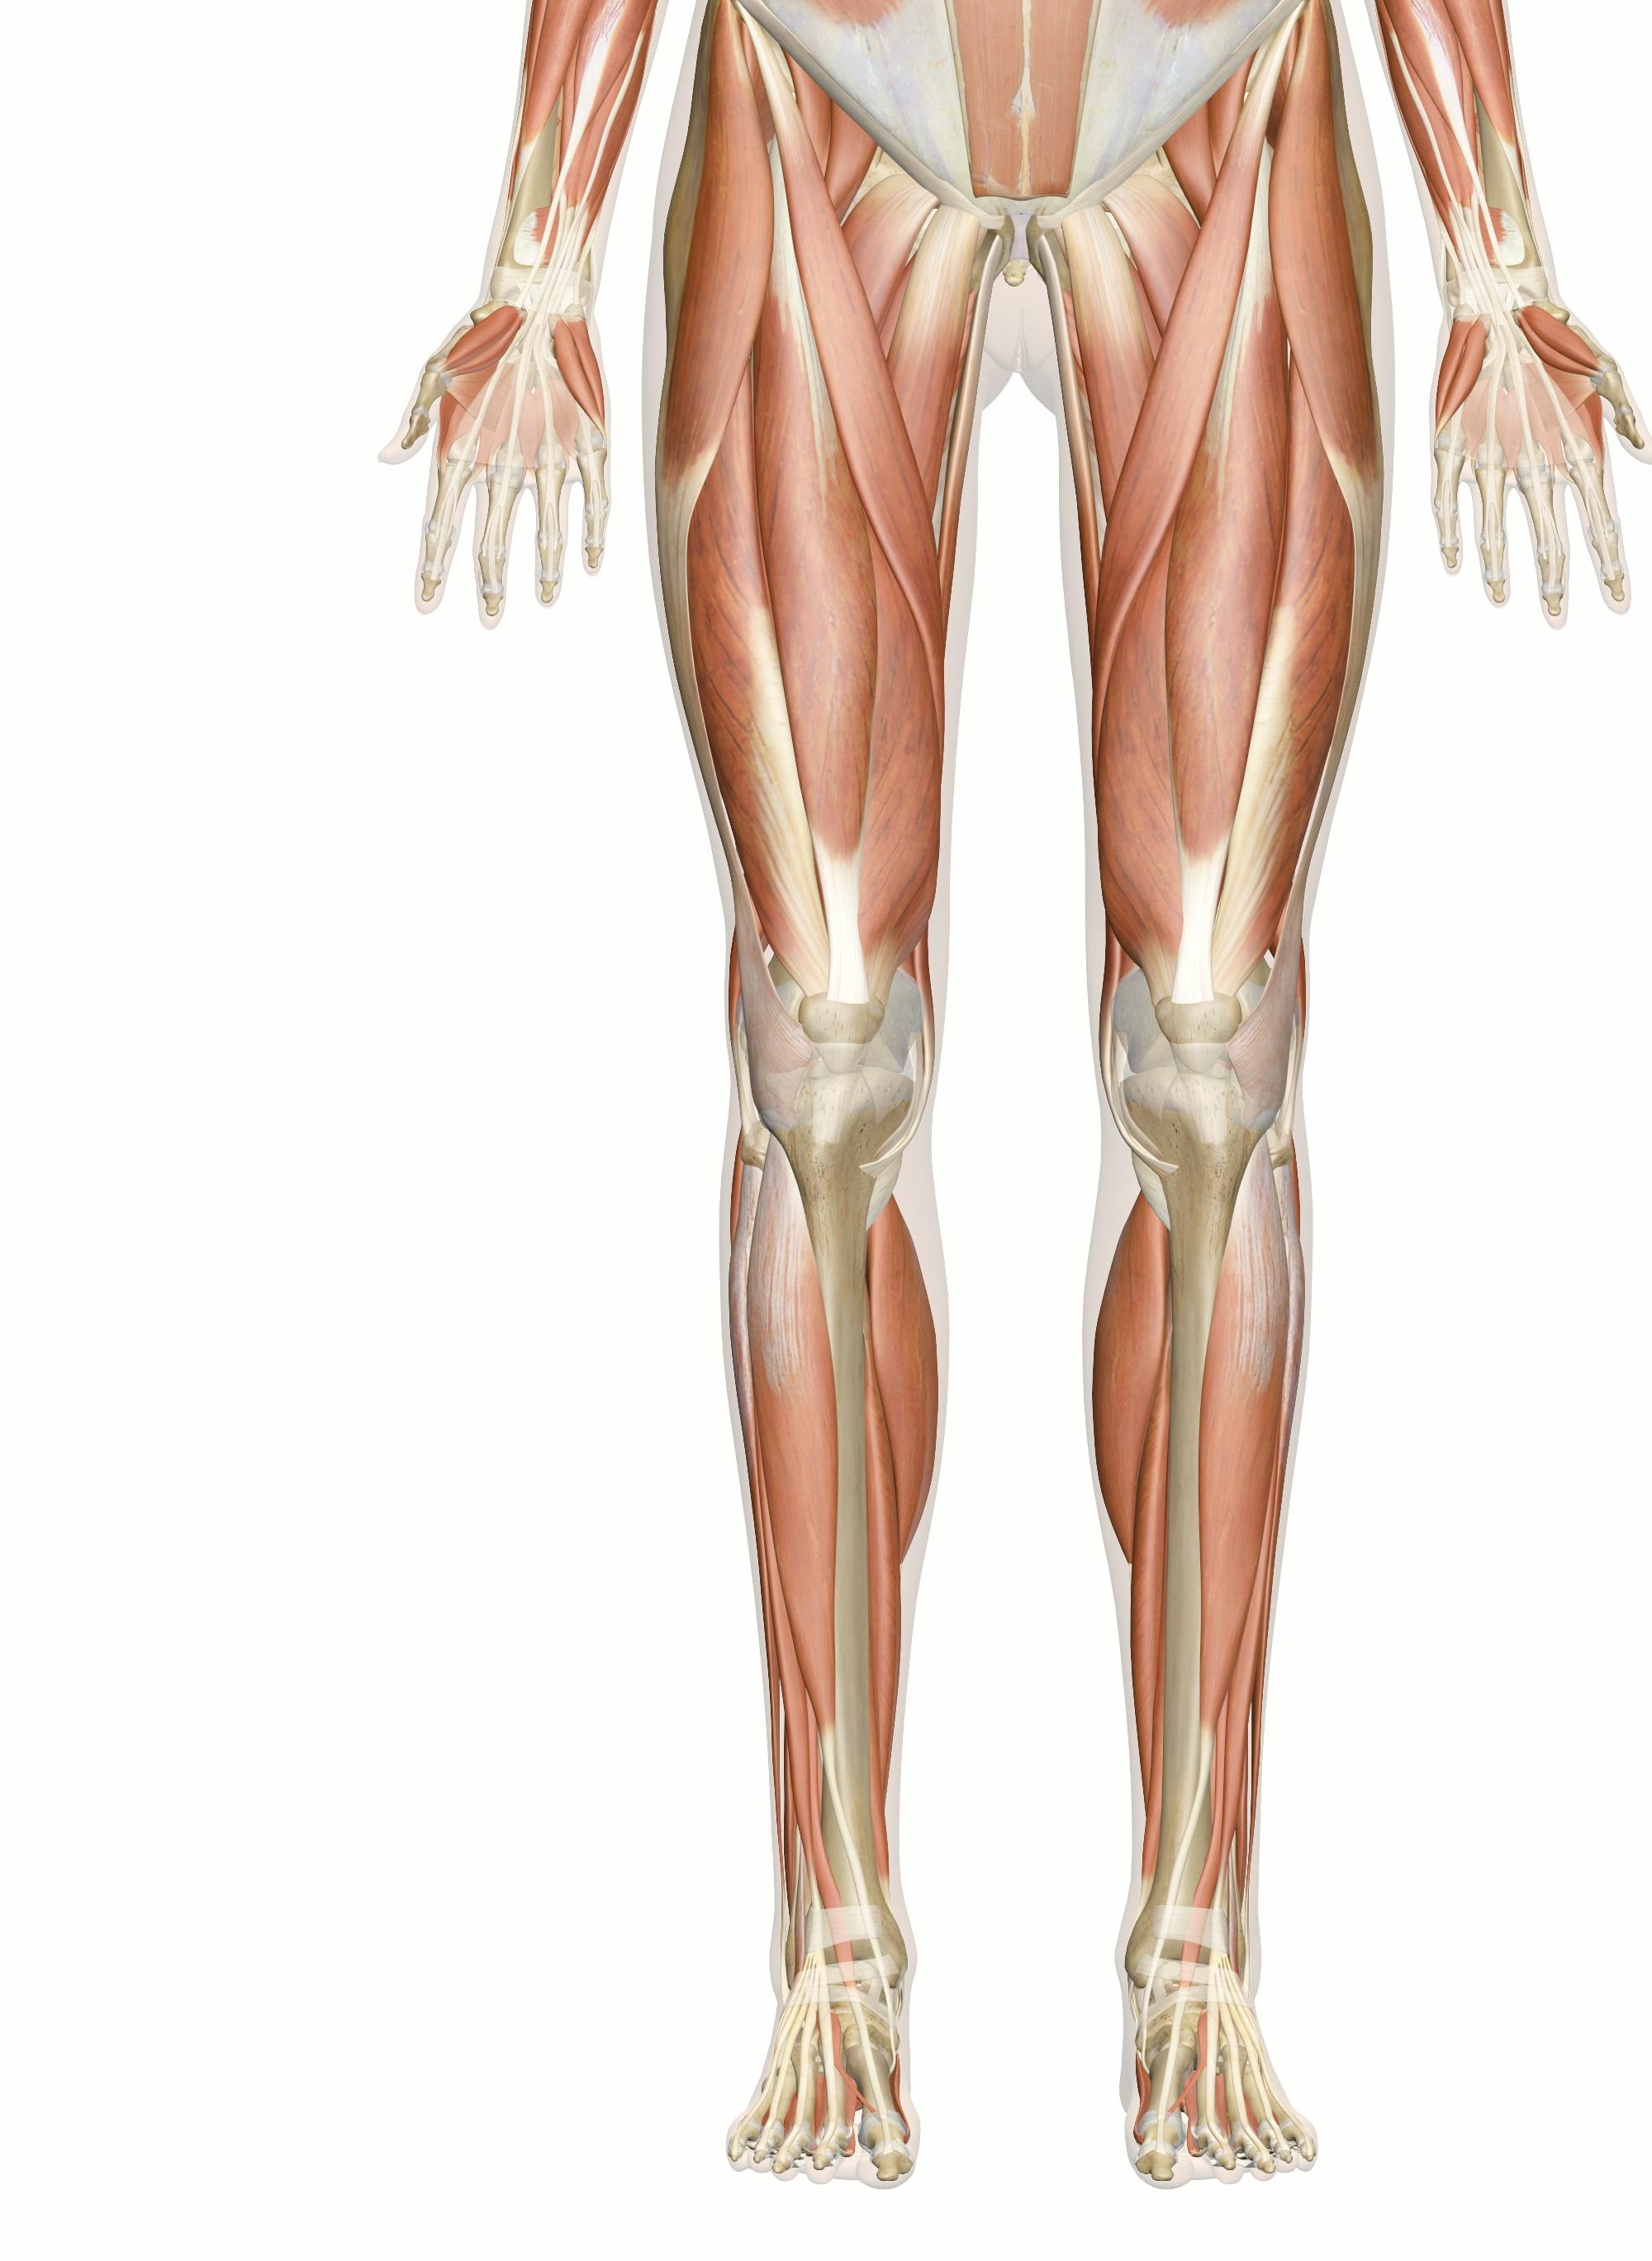 The Muscles of the Leg and Foot: 3D Anatomy Model